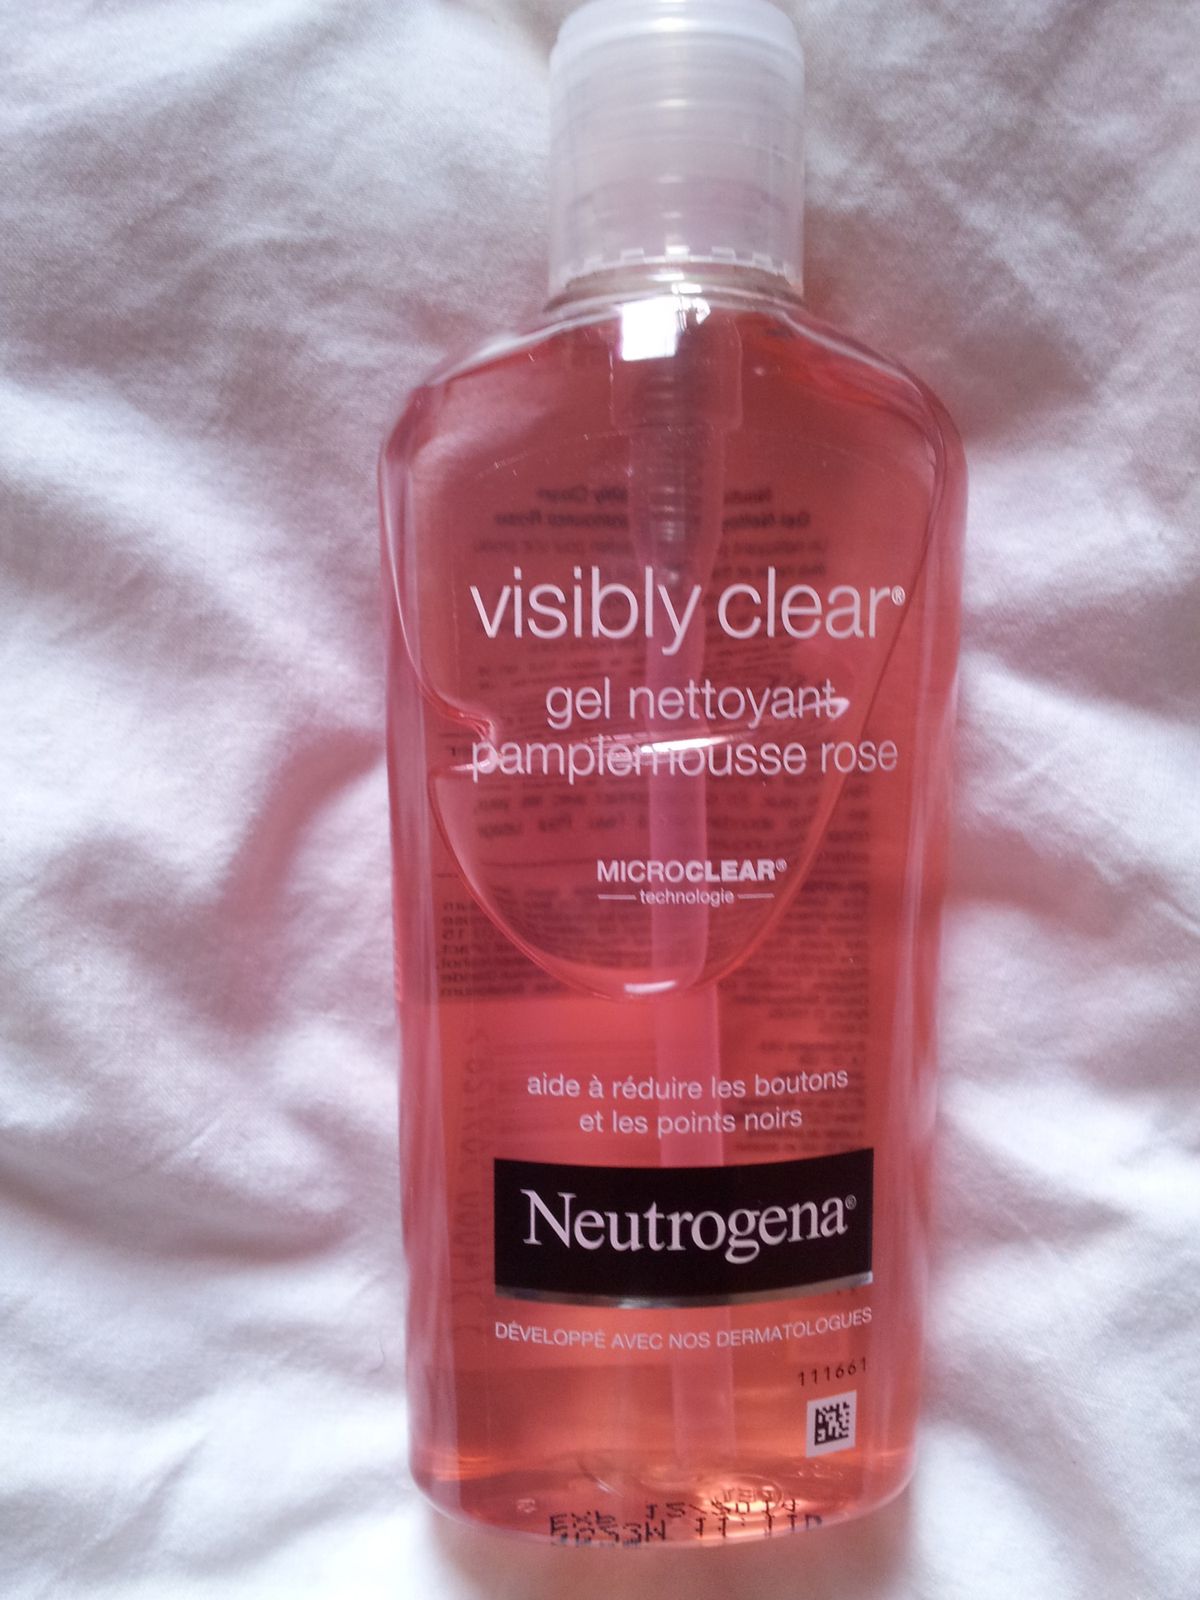 Visibly clear, gel nettoyant pamplemousse rose - Beautyboxaddict